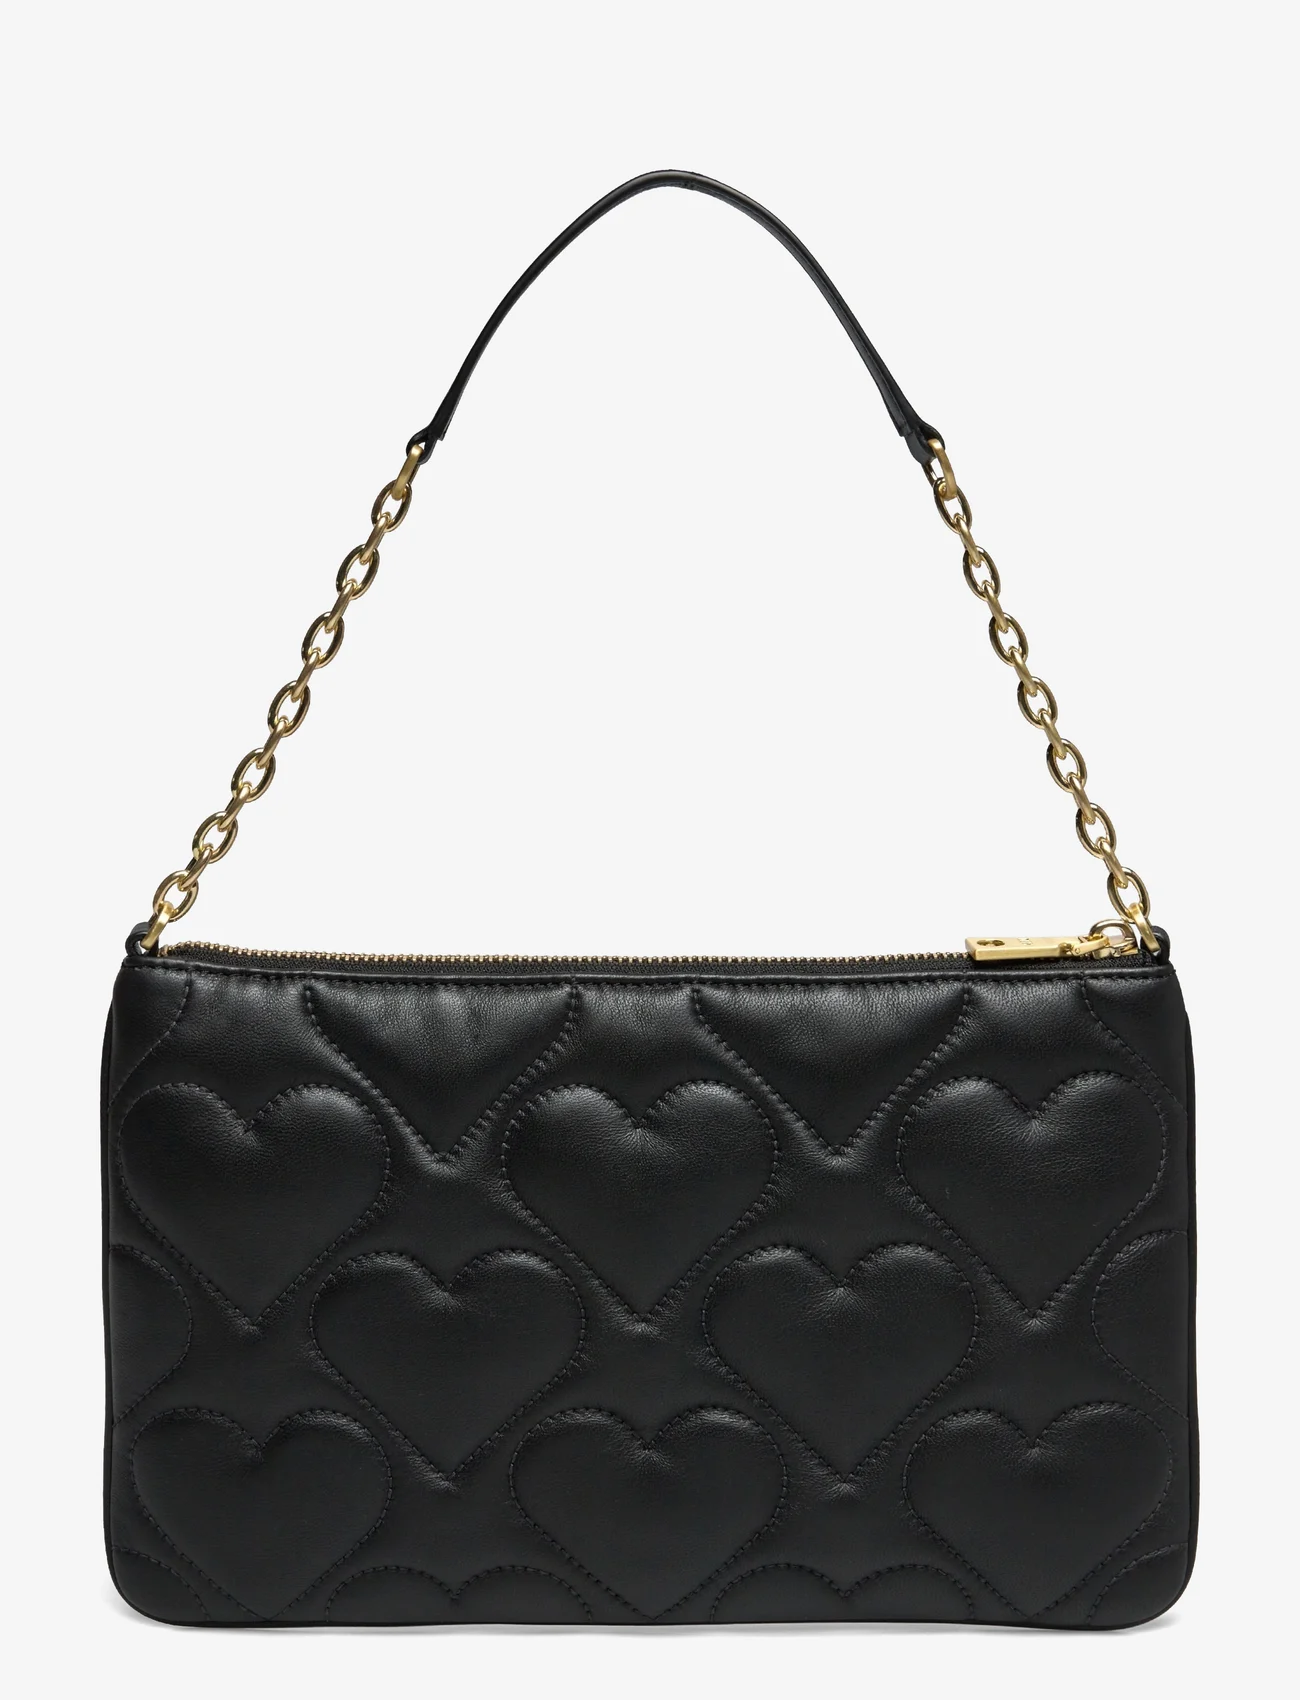 DKNY Bags - HEART OF NY QUILTED BAG - occasionwear - bgd - blk/gold - 1